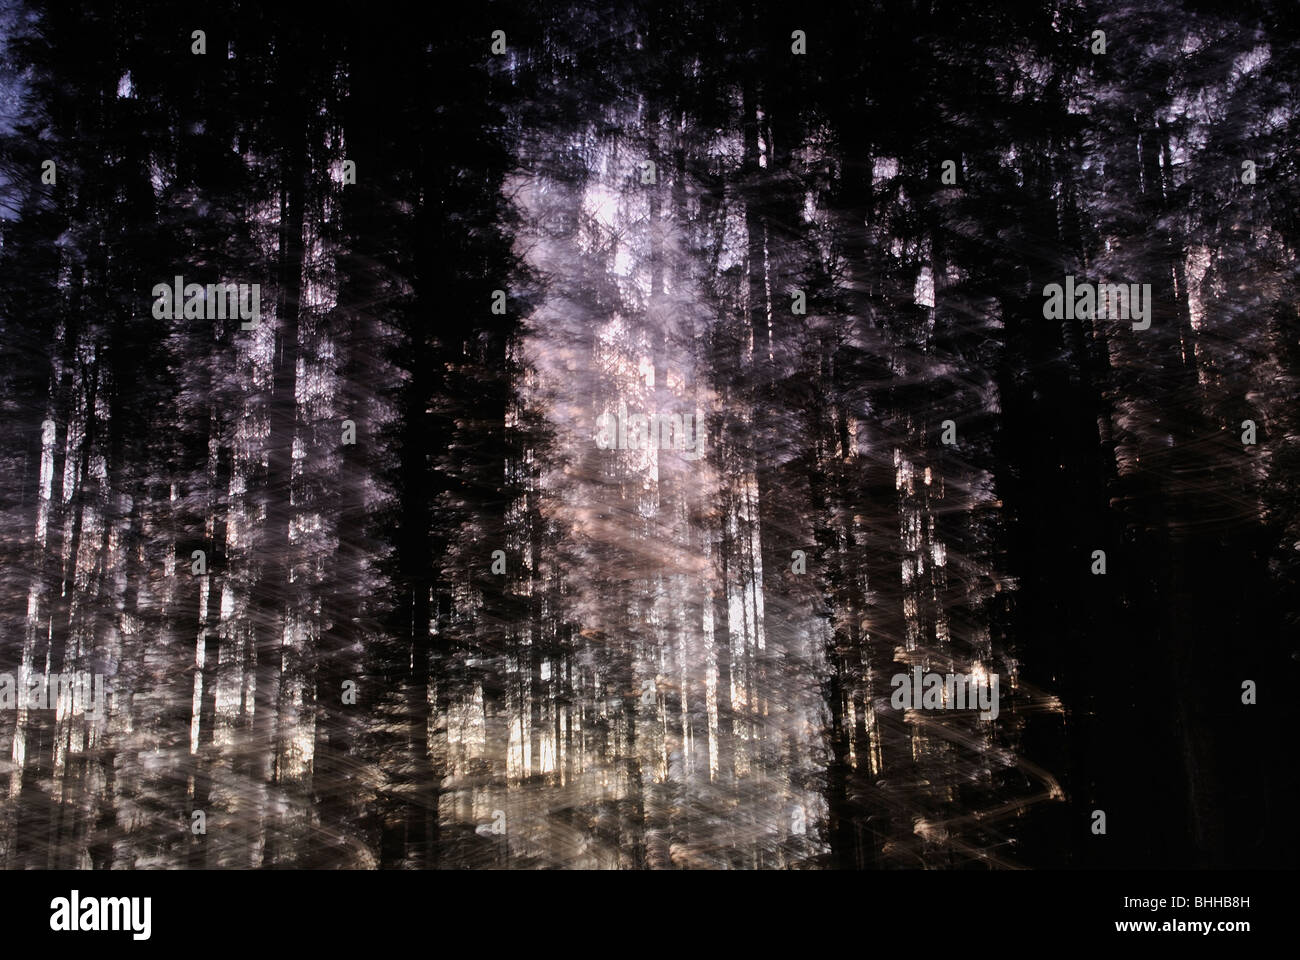 Abstract forest, Sweden. Stock Photo